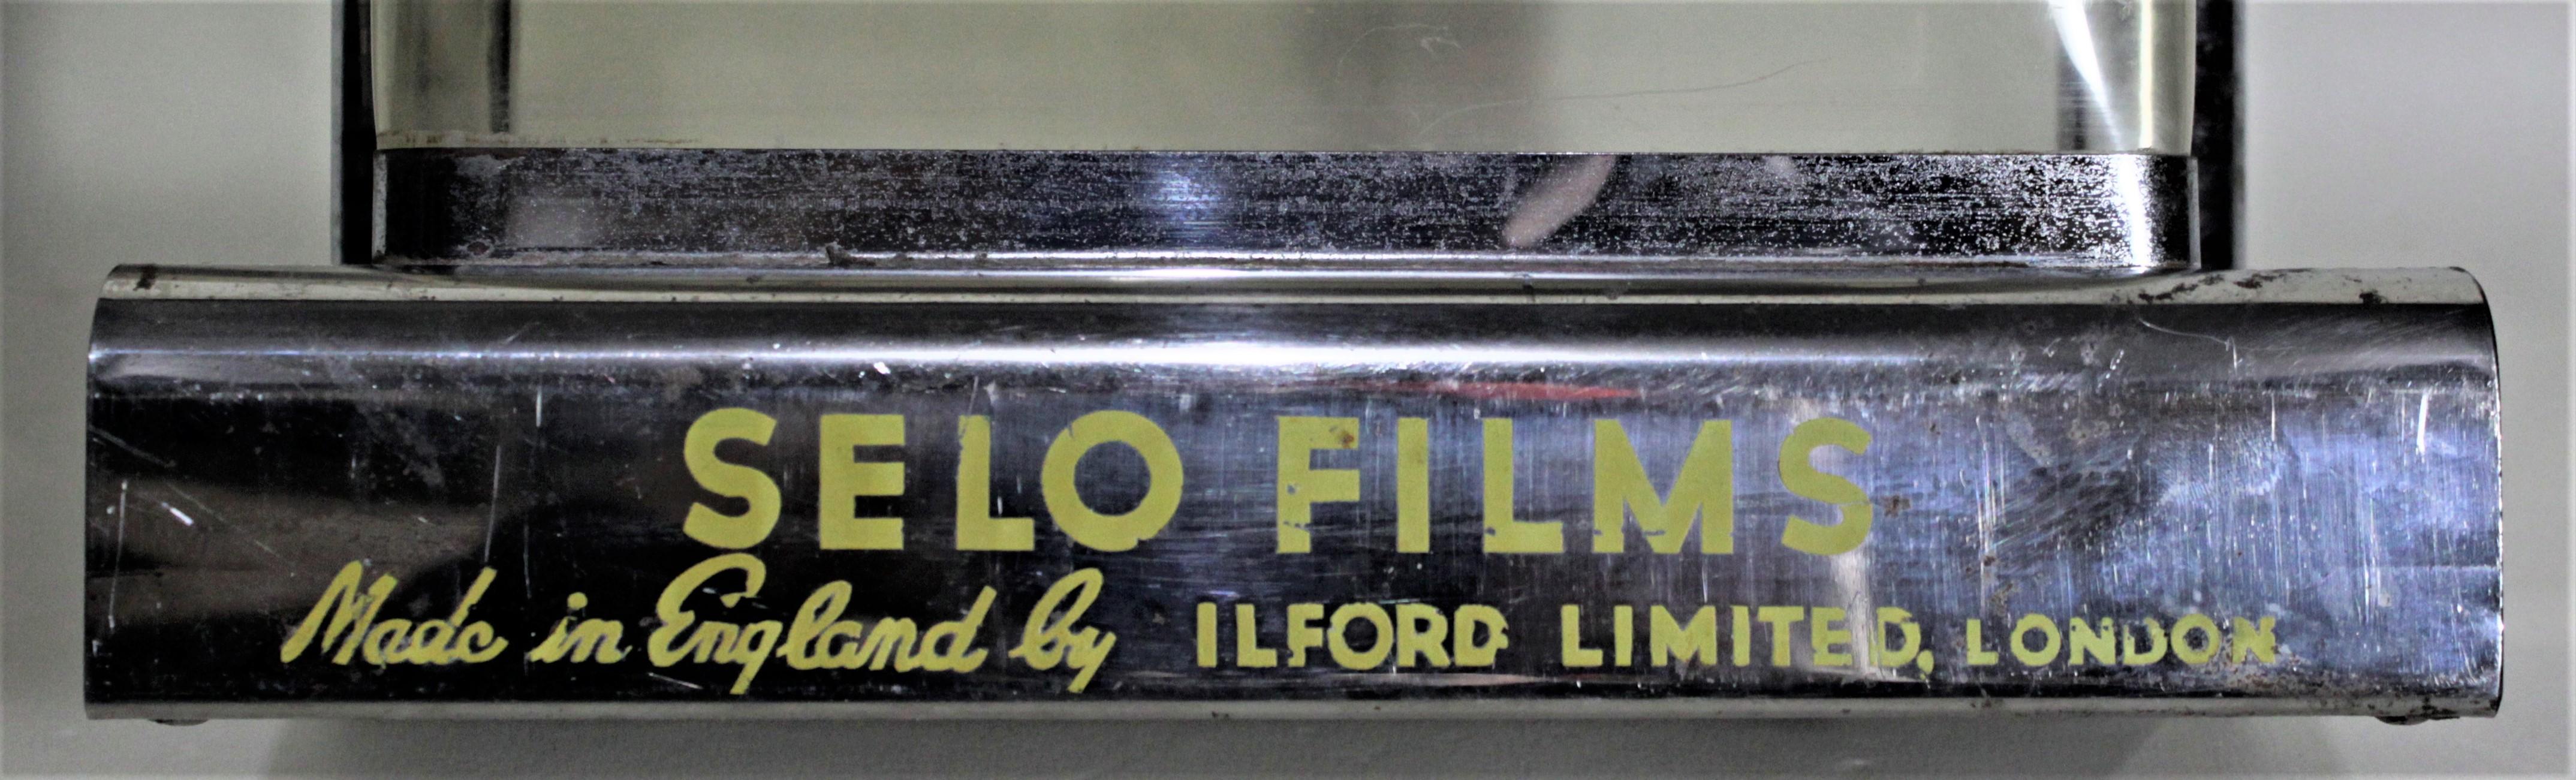 Mid-Century Modern British Ilford Selo Photography Film Store Display For Sale 1